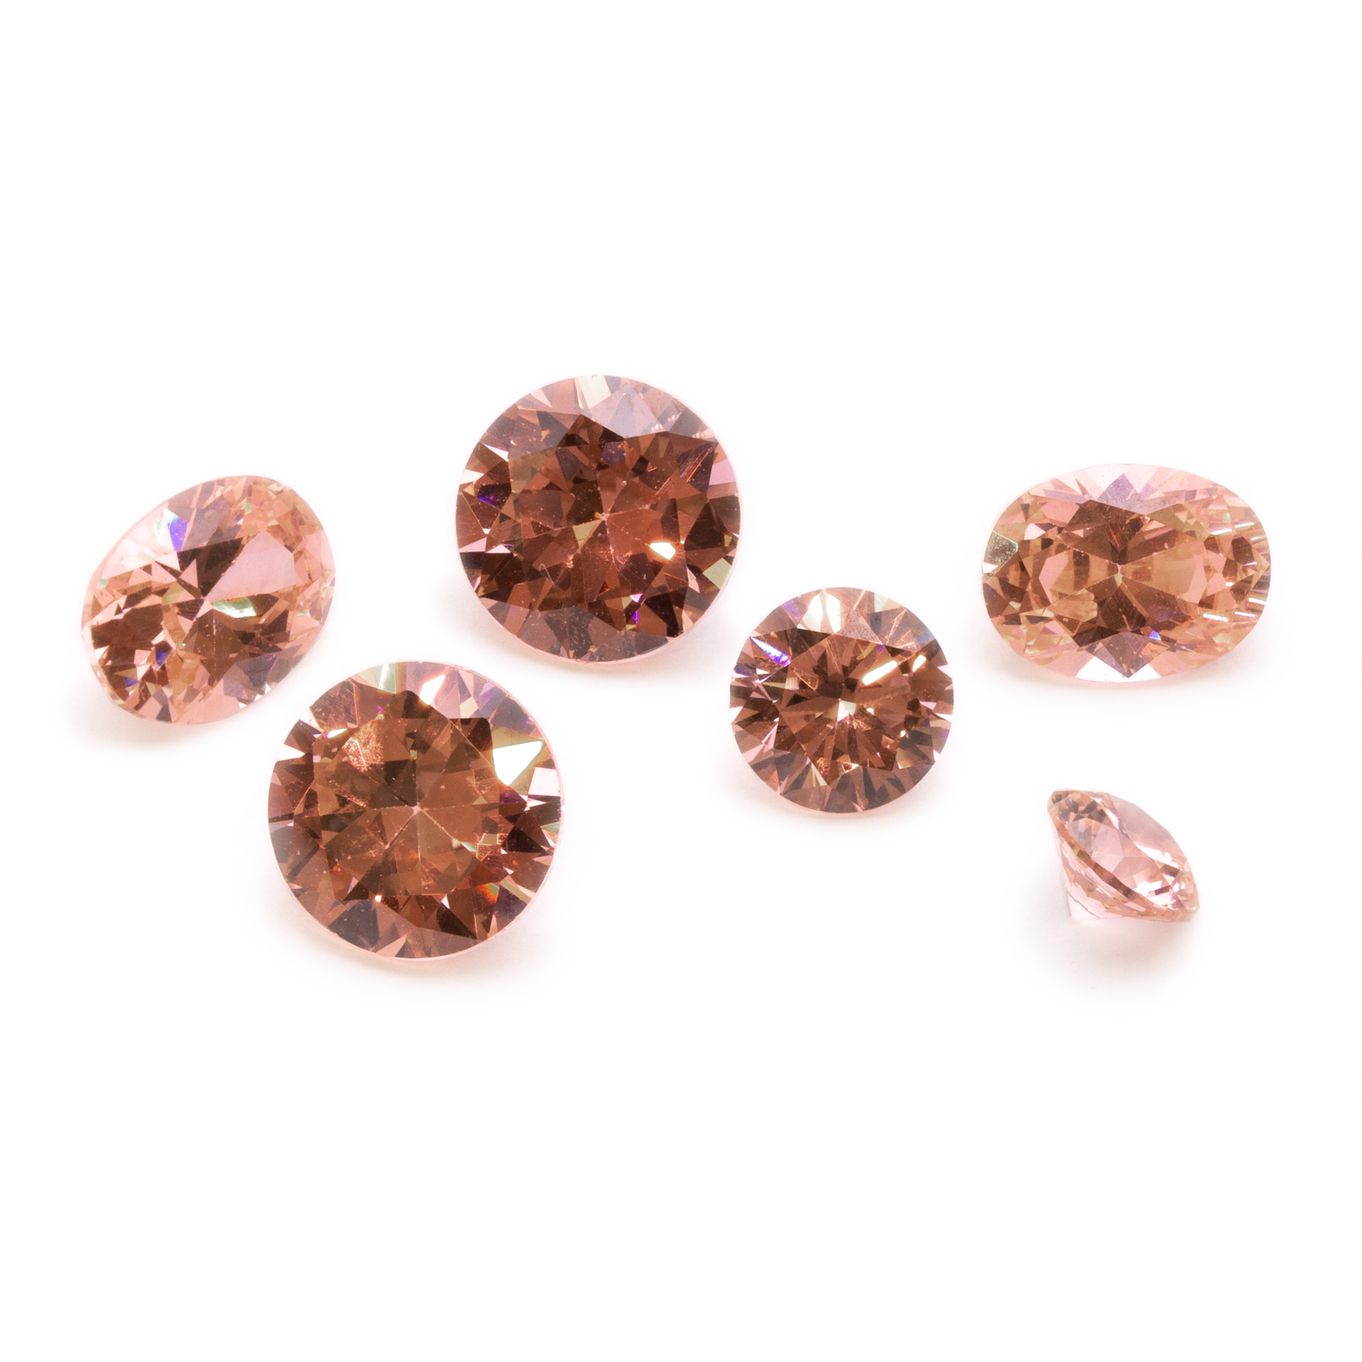 Candy Pink Cubic Zirconia Faceted Stones